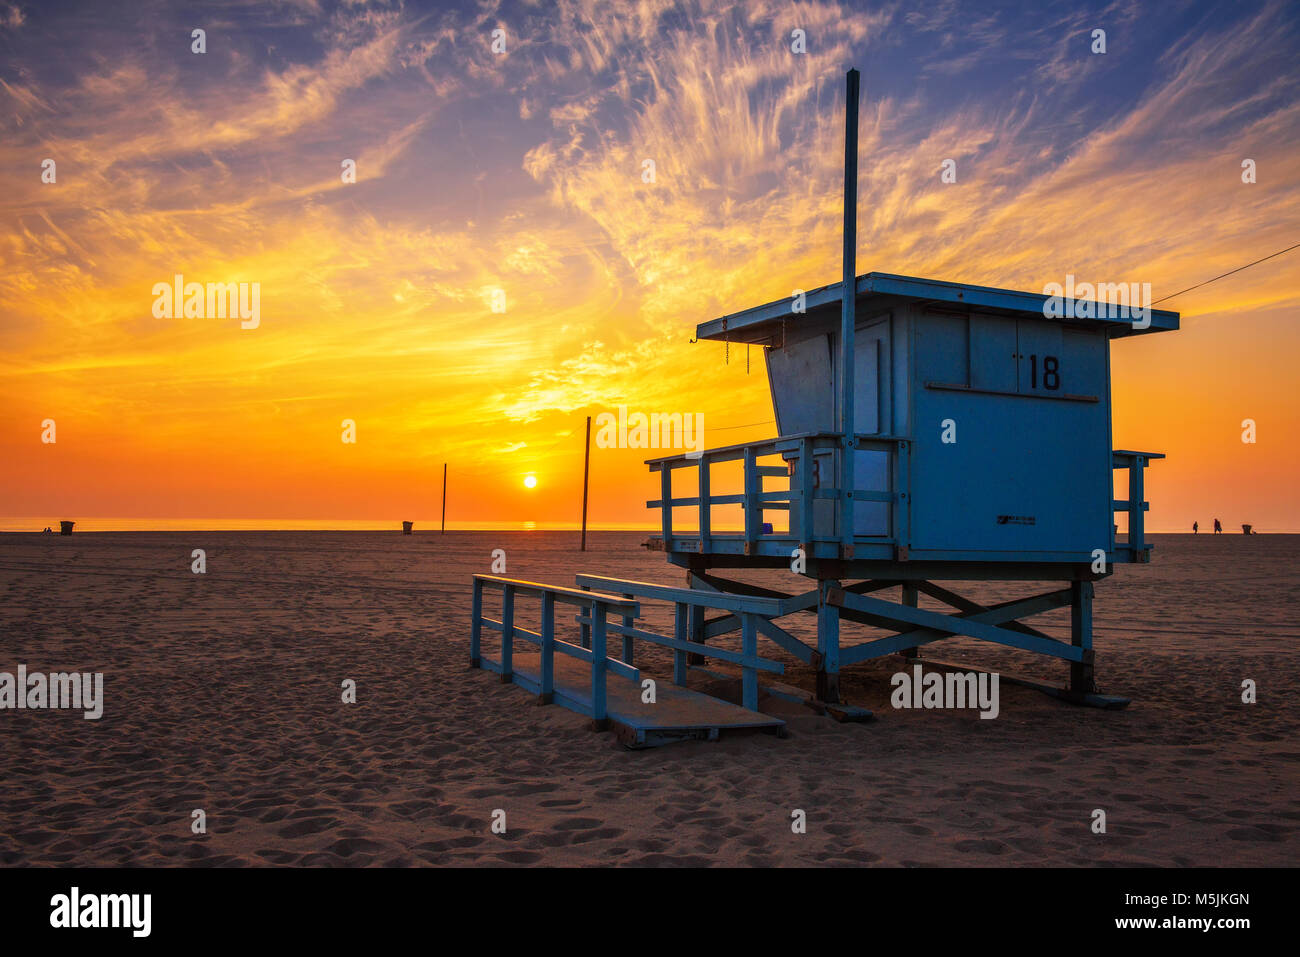 Sunset over Santa Monica beach with lifeguard observation tower Stock Photo